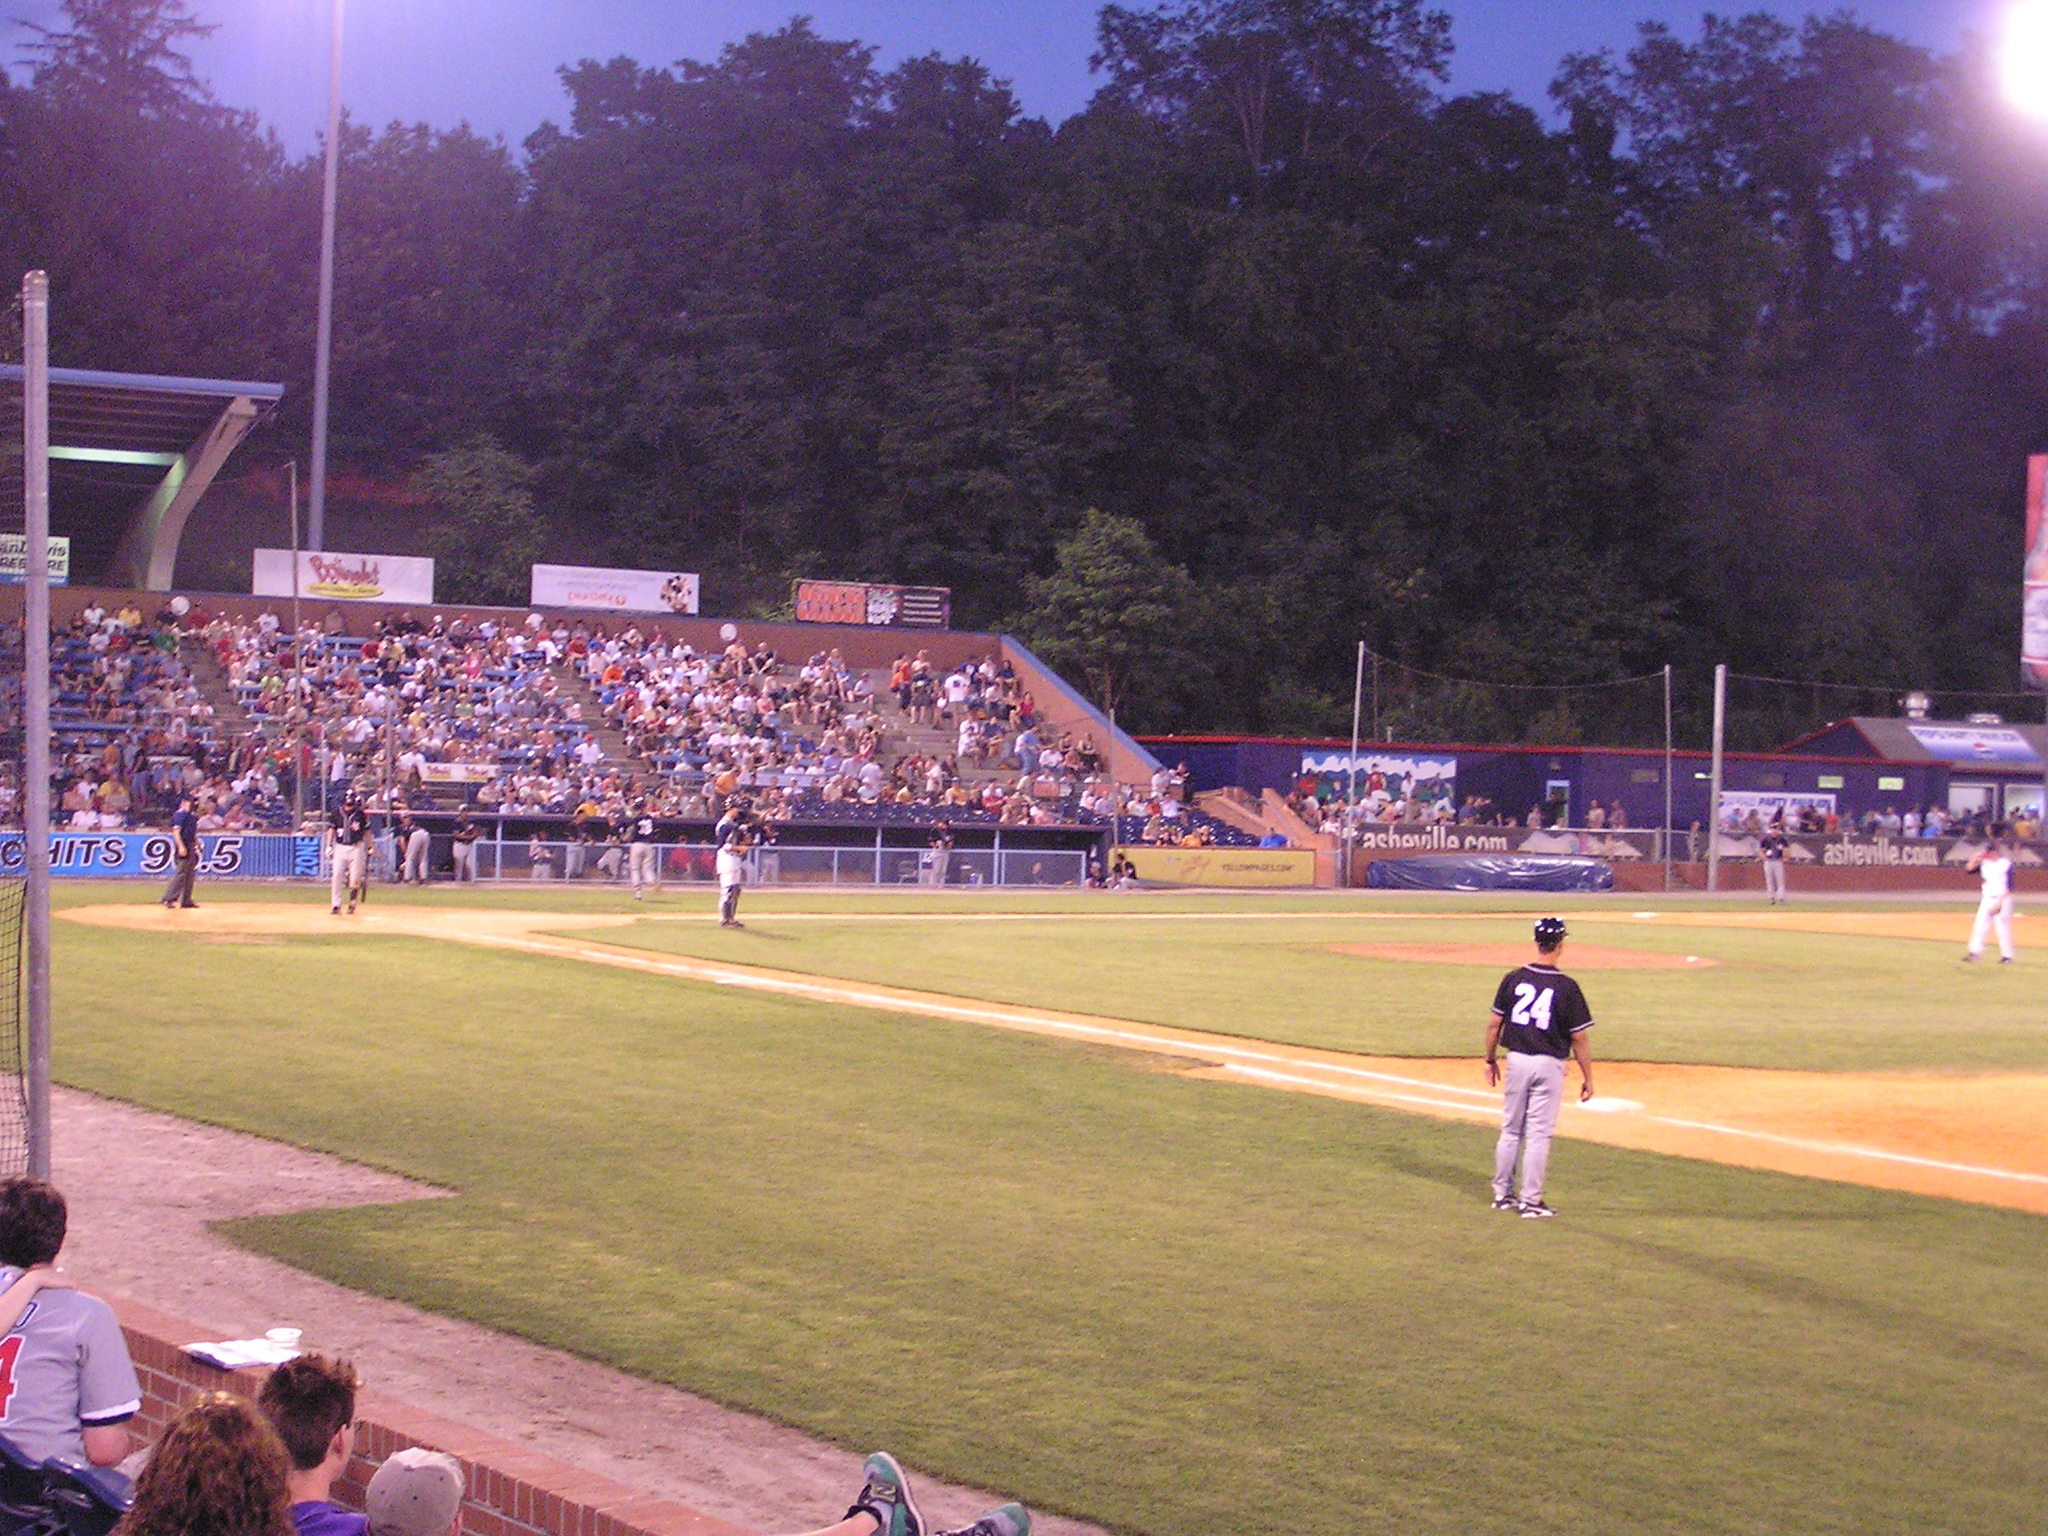 Game action at McCormick Field - Asheville, NC